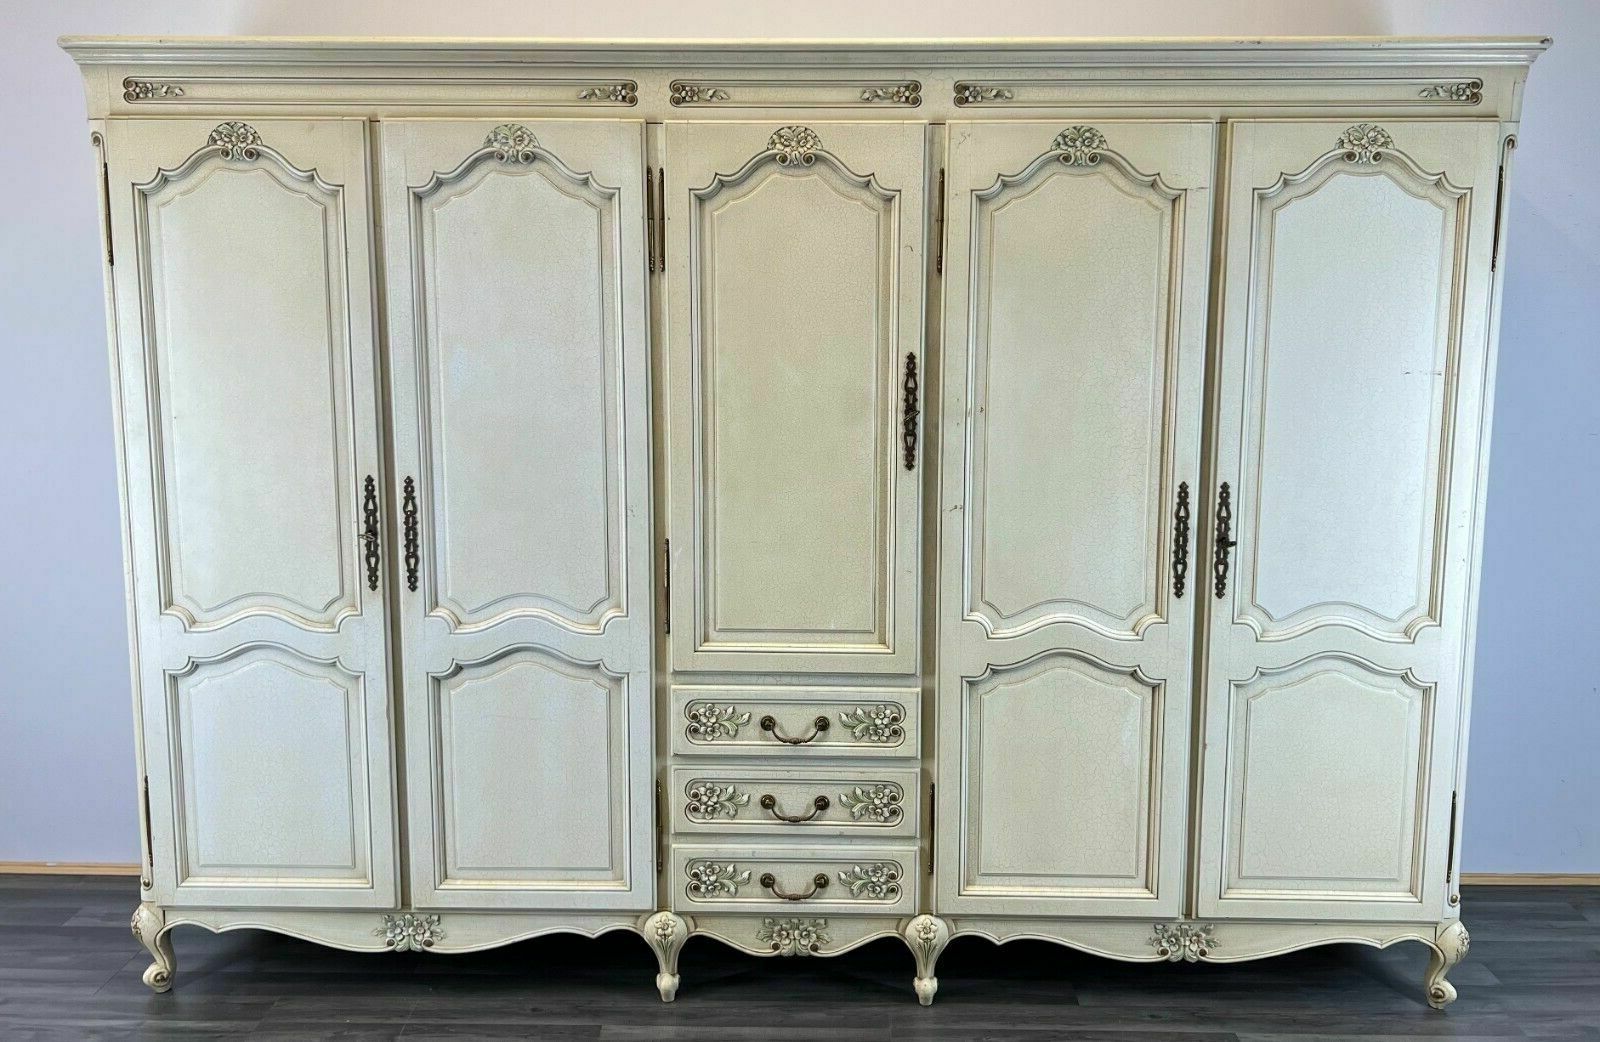 Louis Xv Style Shabby Chic French Carved 5 Door Armoire Wardrobe | Vinterior Throughout Vintage Shabby Chic Wardrobes (Gallery 12 of 20)